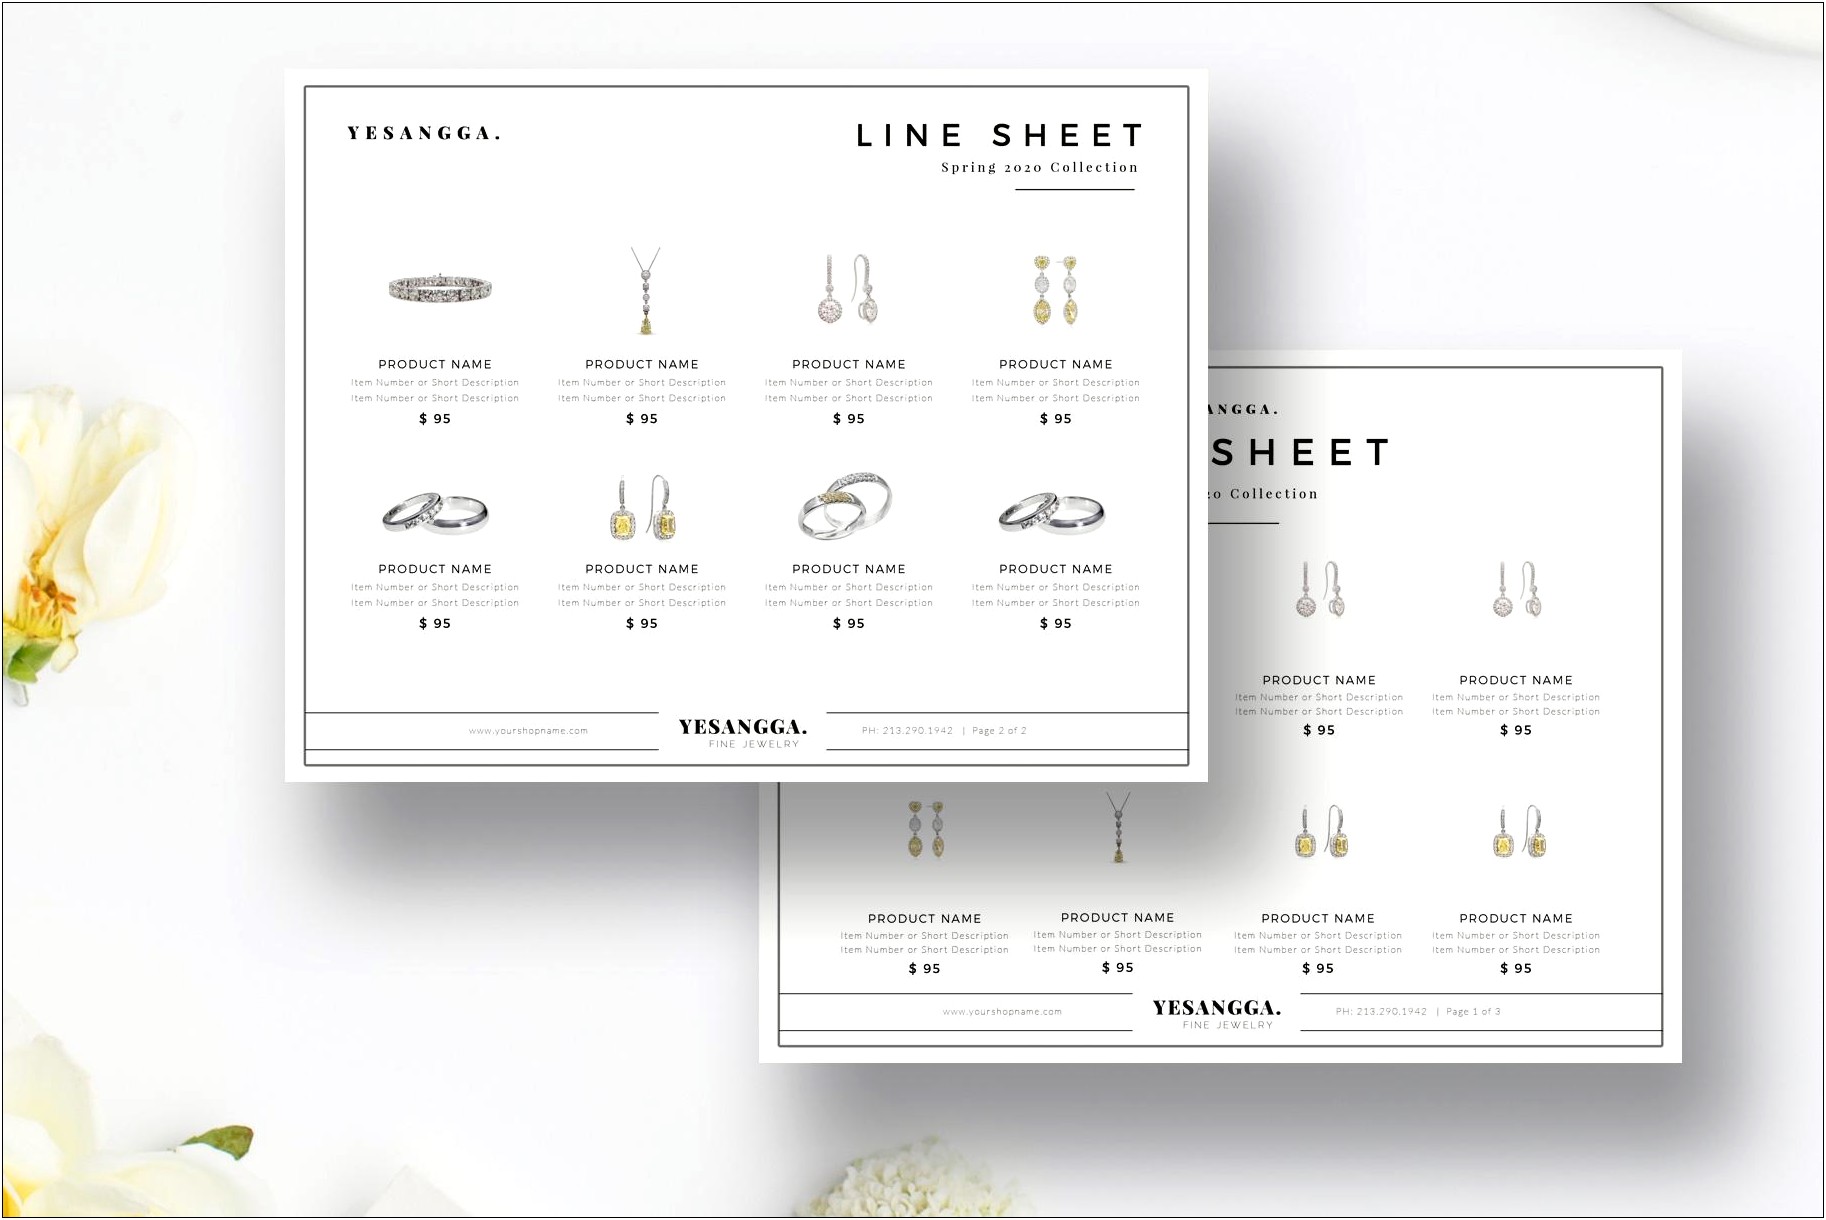 Free Product Line Sheet Template Download